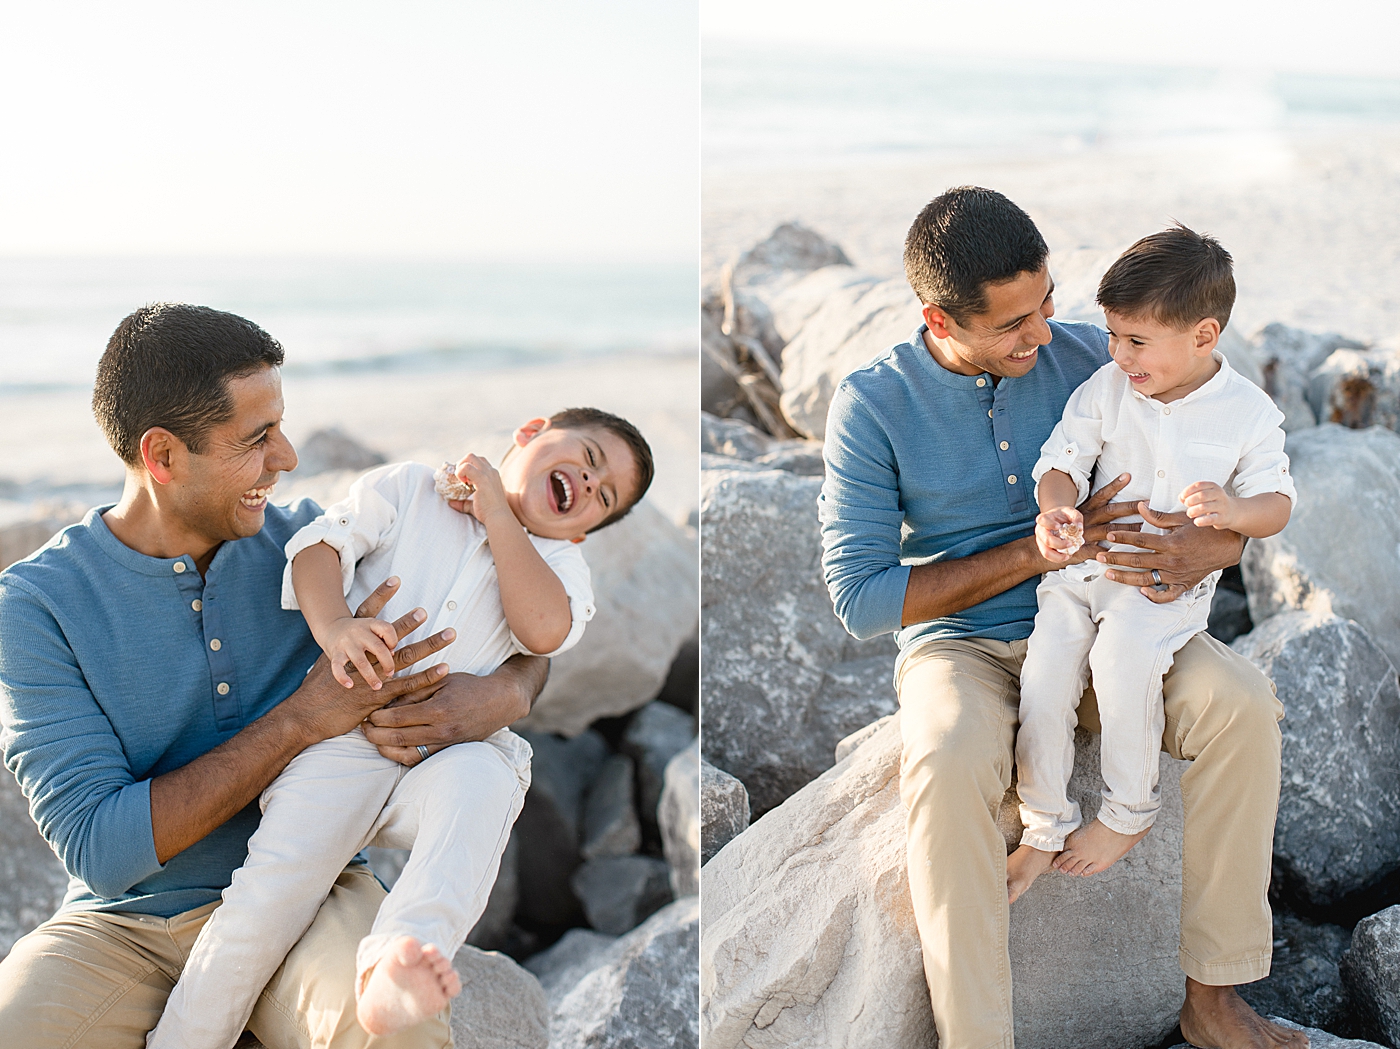 Dad and his son laughing together. Photos by Brittany Elise Photography.